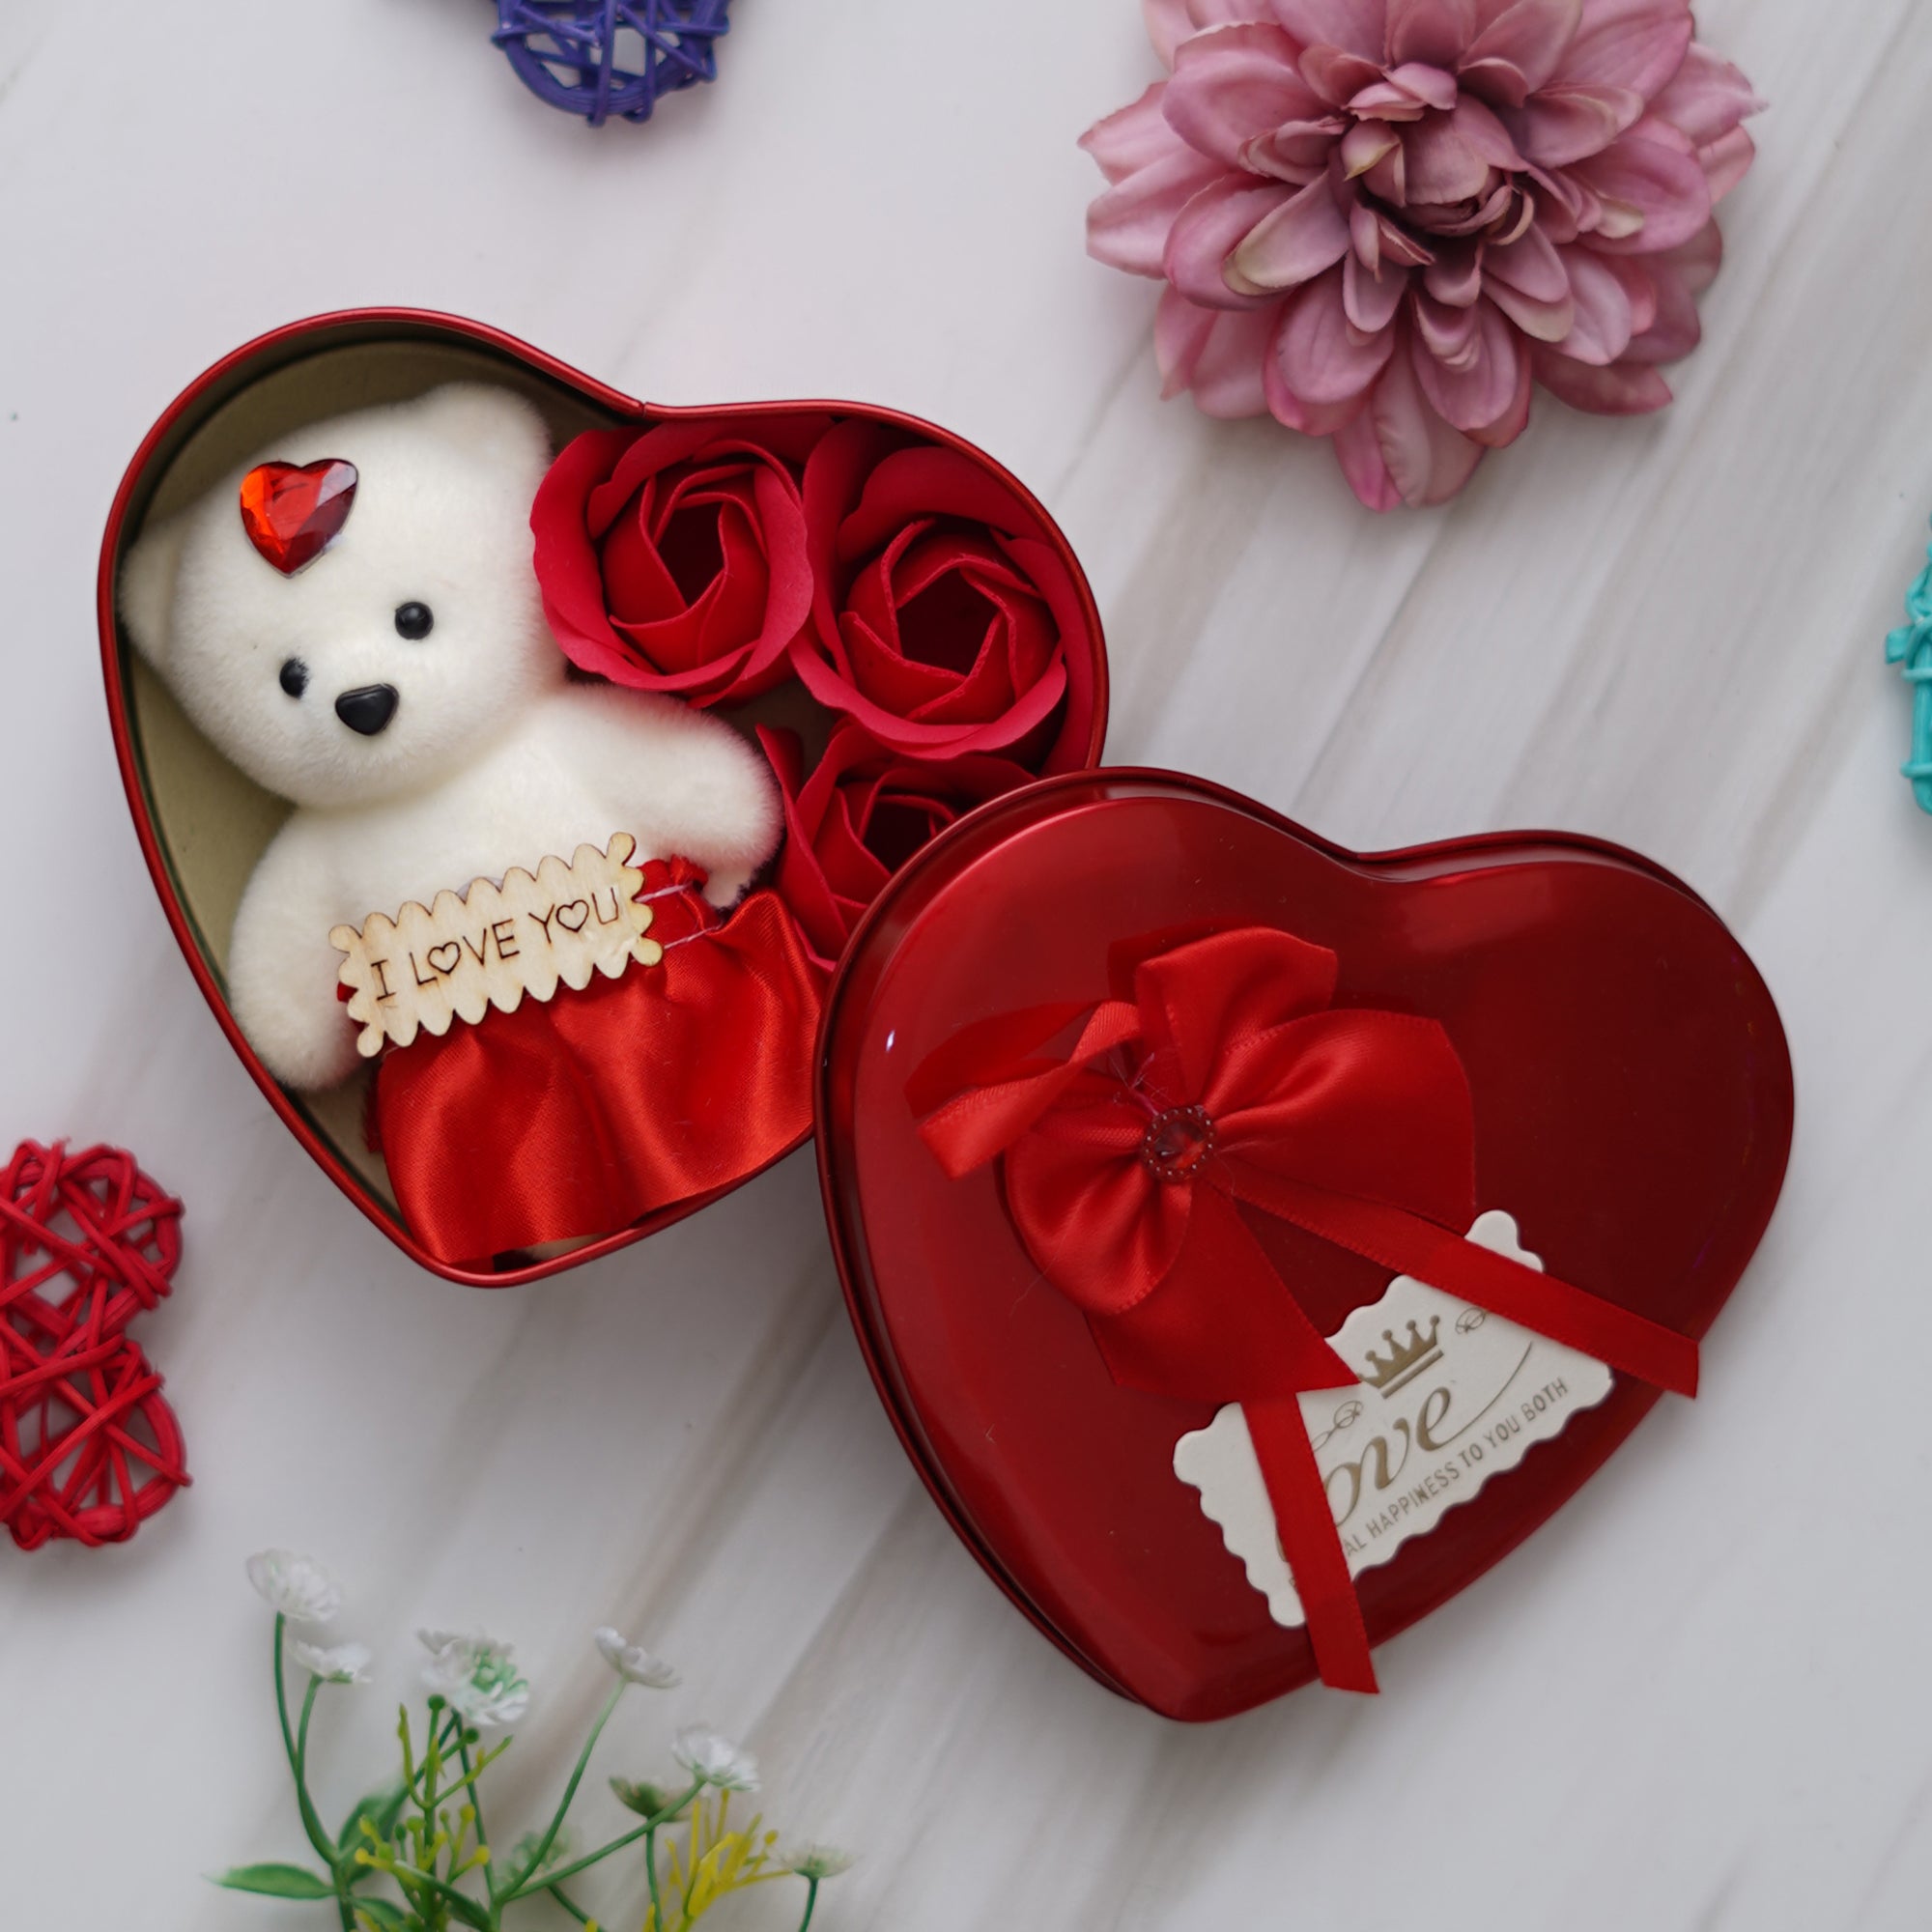 Valentine Combo of Pack of 12 Love Coupons Gift Cards Set, Golden Rose Gift Set, Heart Shaped Gift Box Set with White Teddy and Red Roses 5